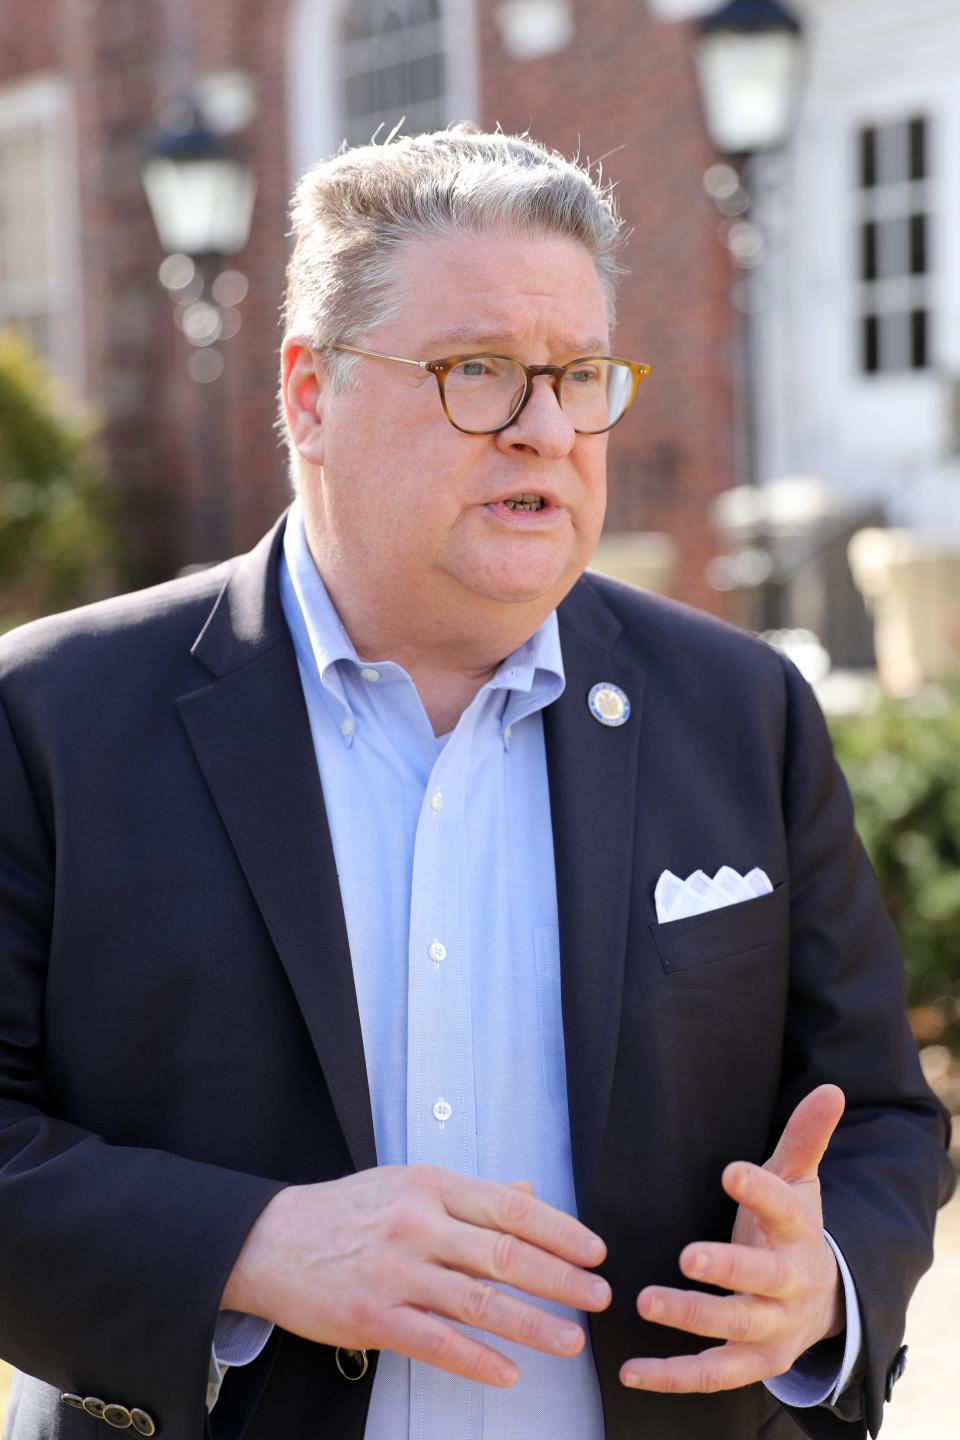 Senator Pete Harckham, who represents Westchester and the Hudson Valley, is pushing for the passage of the Traveling with Dignity Act. The legislation would require adult changing tables in public rest areas, museums, libraries and government-owned facilities throughout the state.